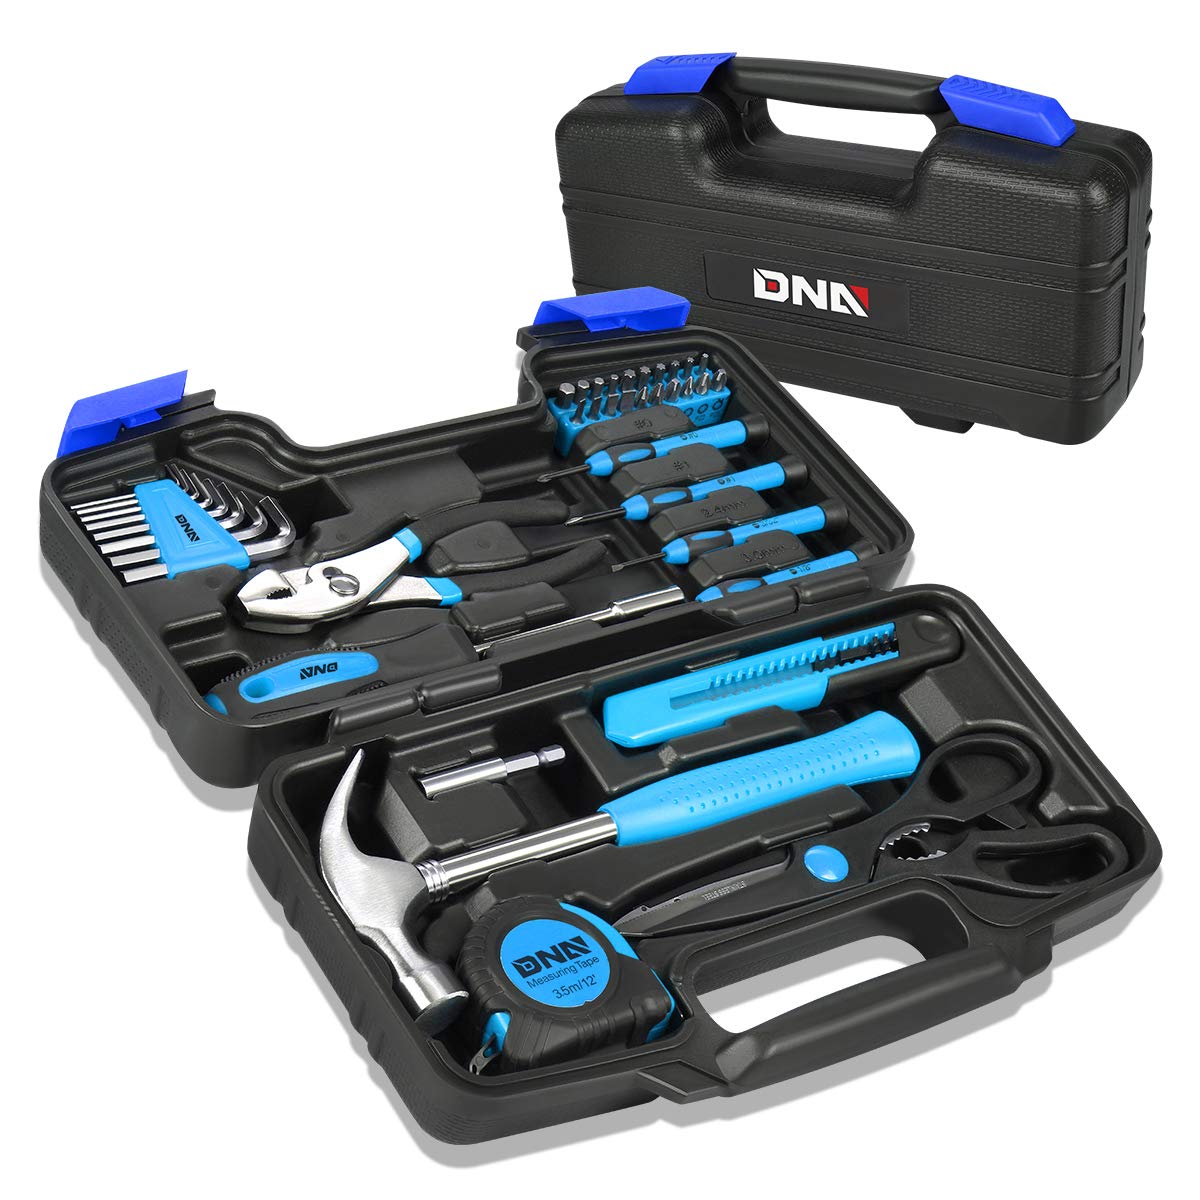 DNA MOTORING 39-Piece Household Tool Set General Repair Small Hand Tool Kit Storage Case for Home Garage Office College Dormitory Use, Blue, TOOLS-00008